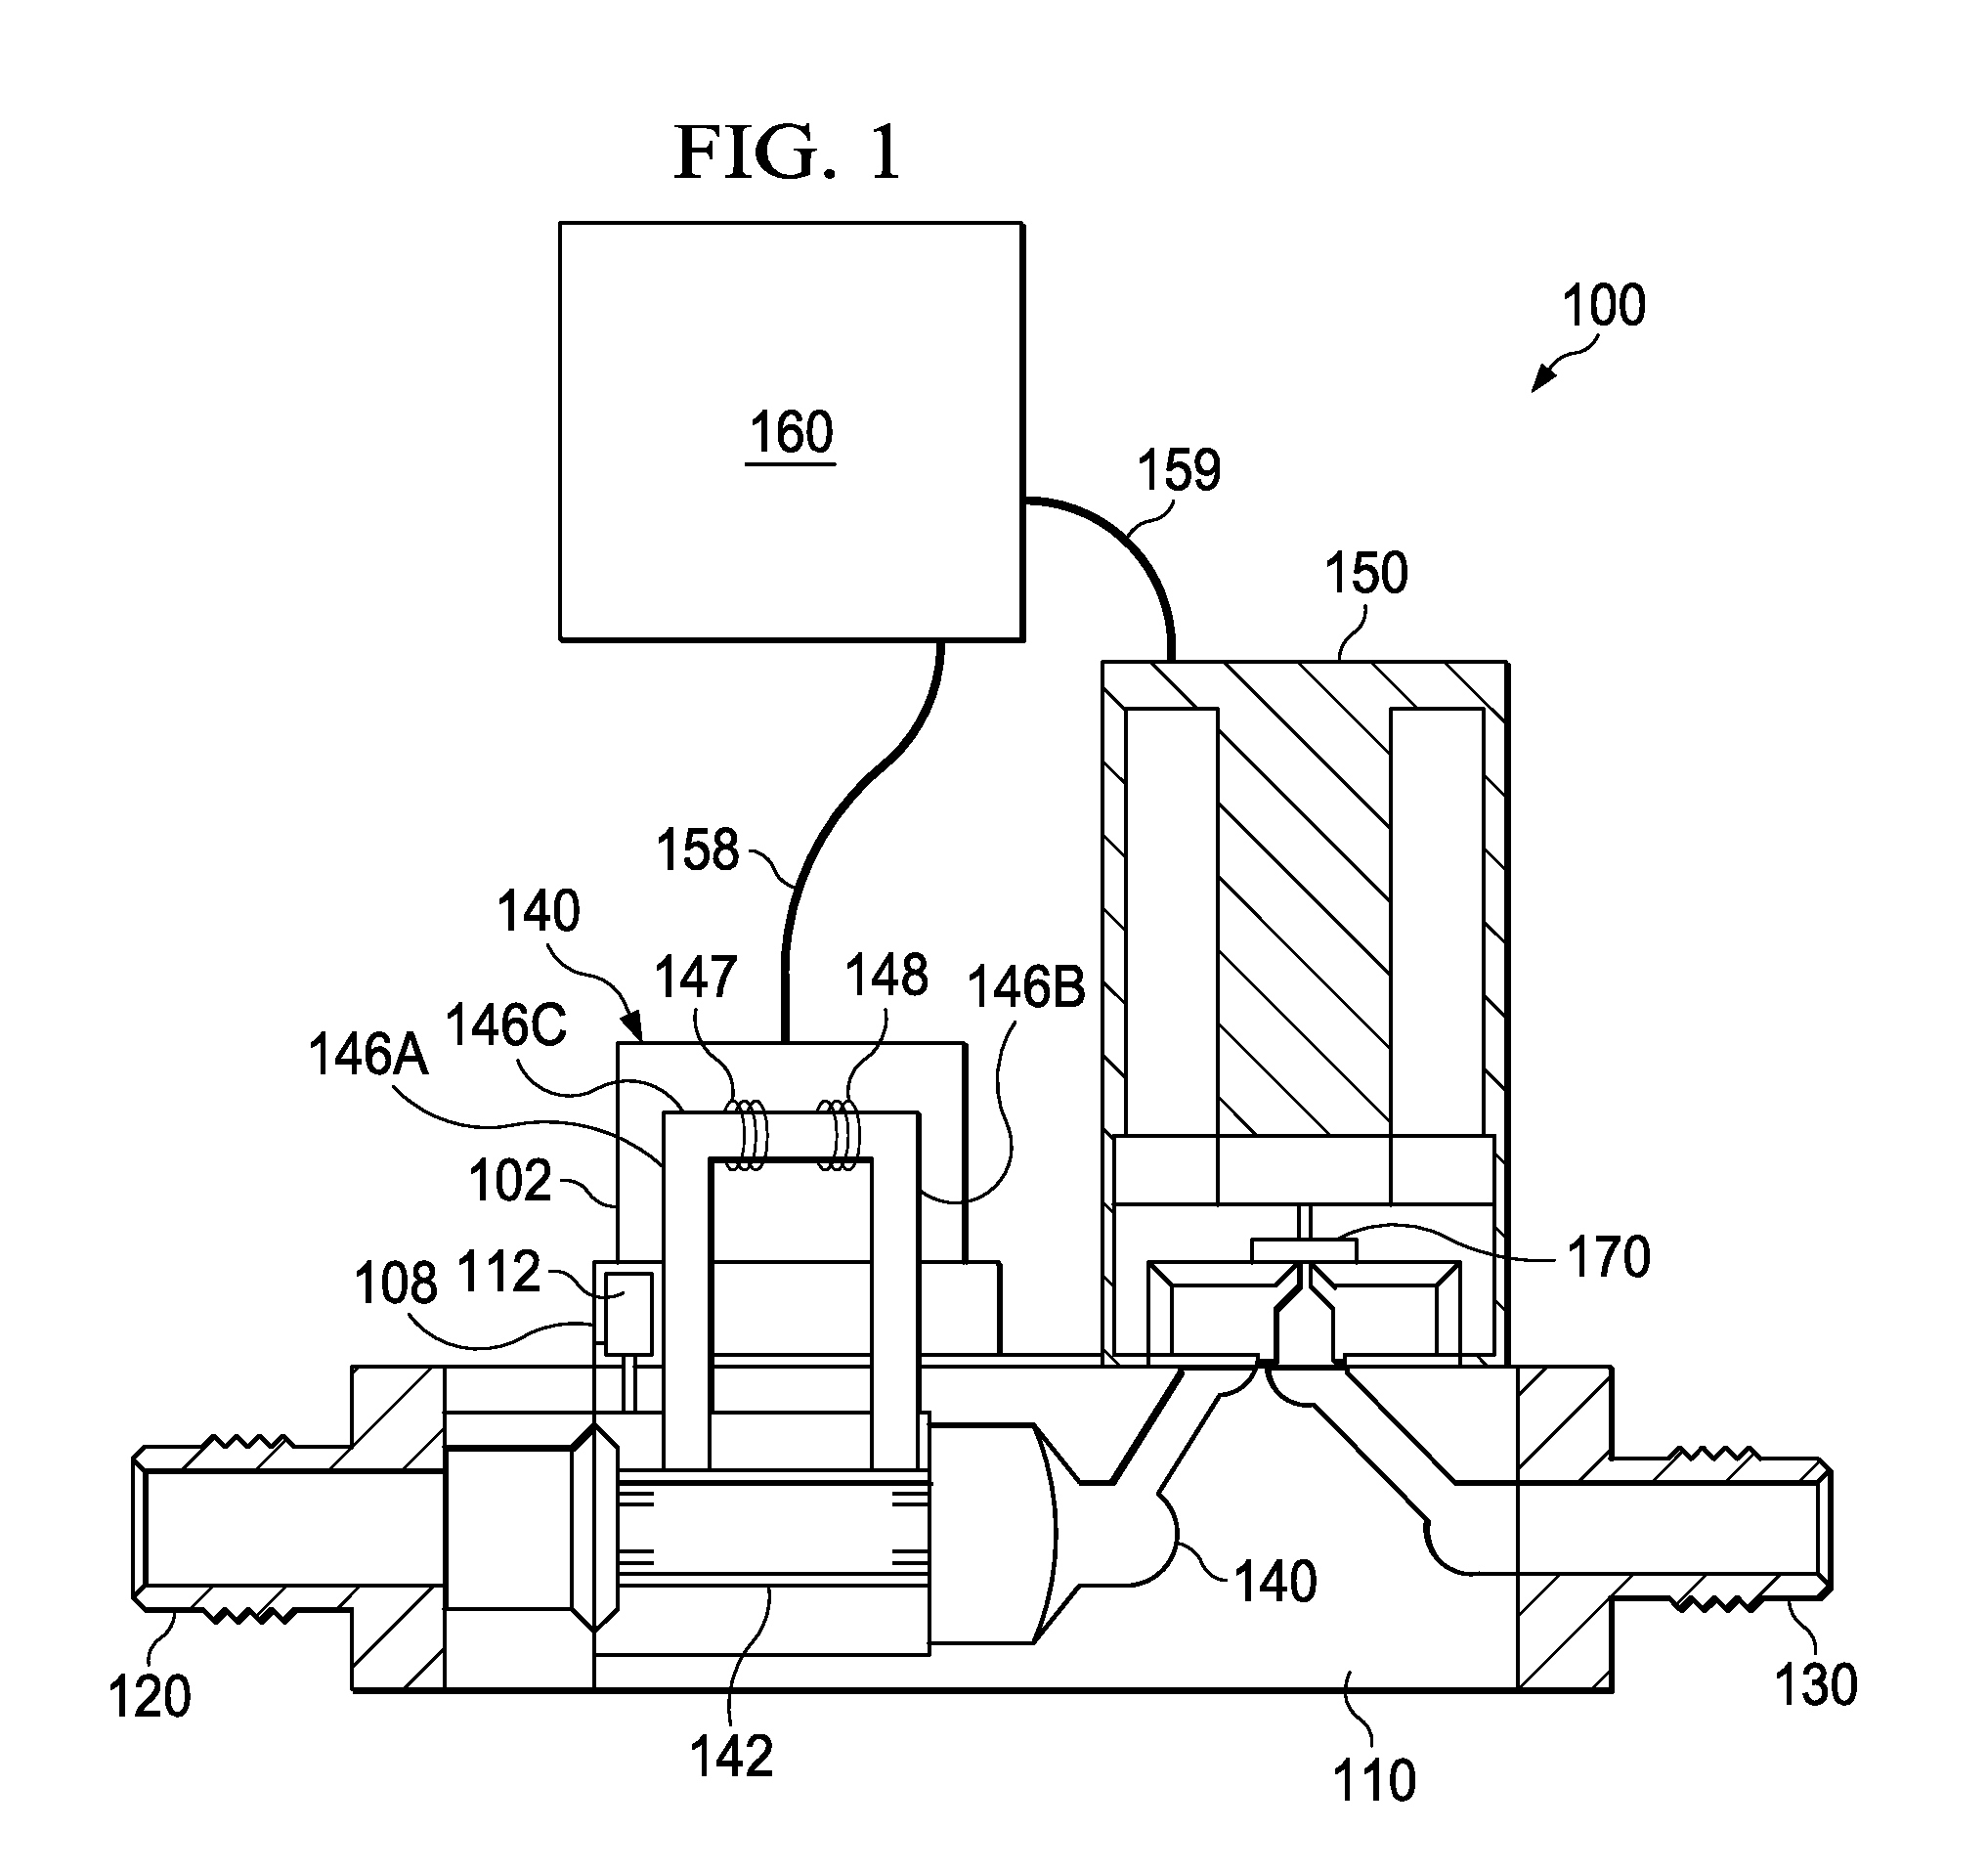 System and method for improving the accuracy of a rate of decay measurement for real time correction in a mass flow controller or mass flow meter by using a thermal model to minimize thermally induced error in the rod measurement